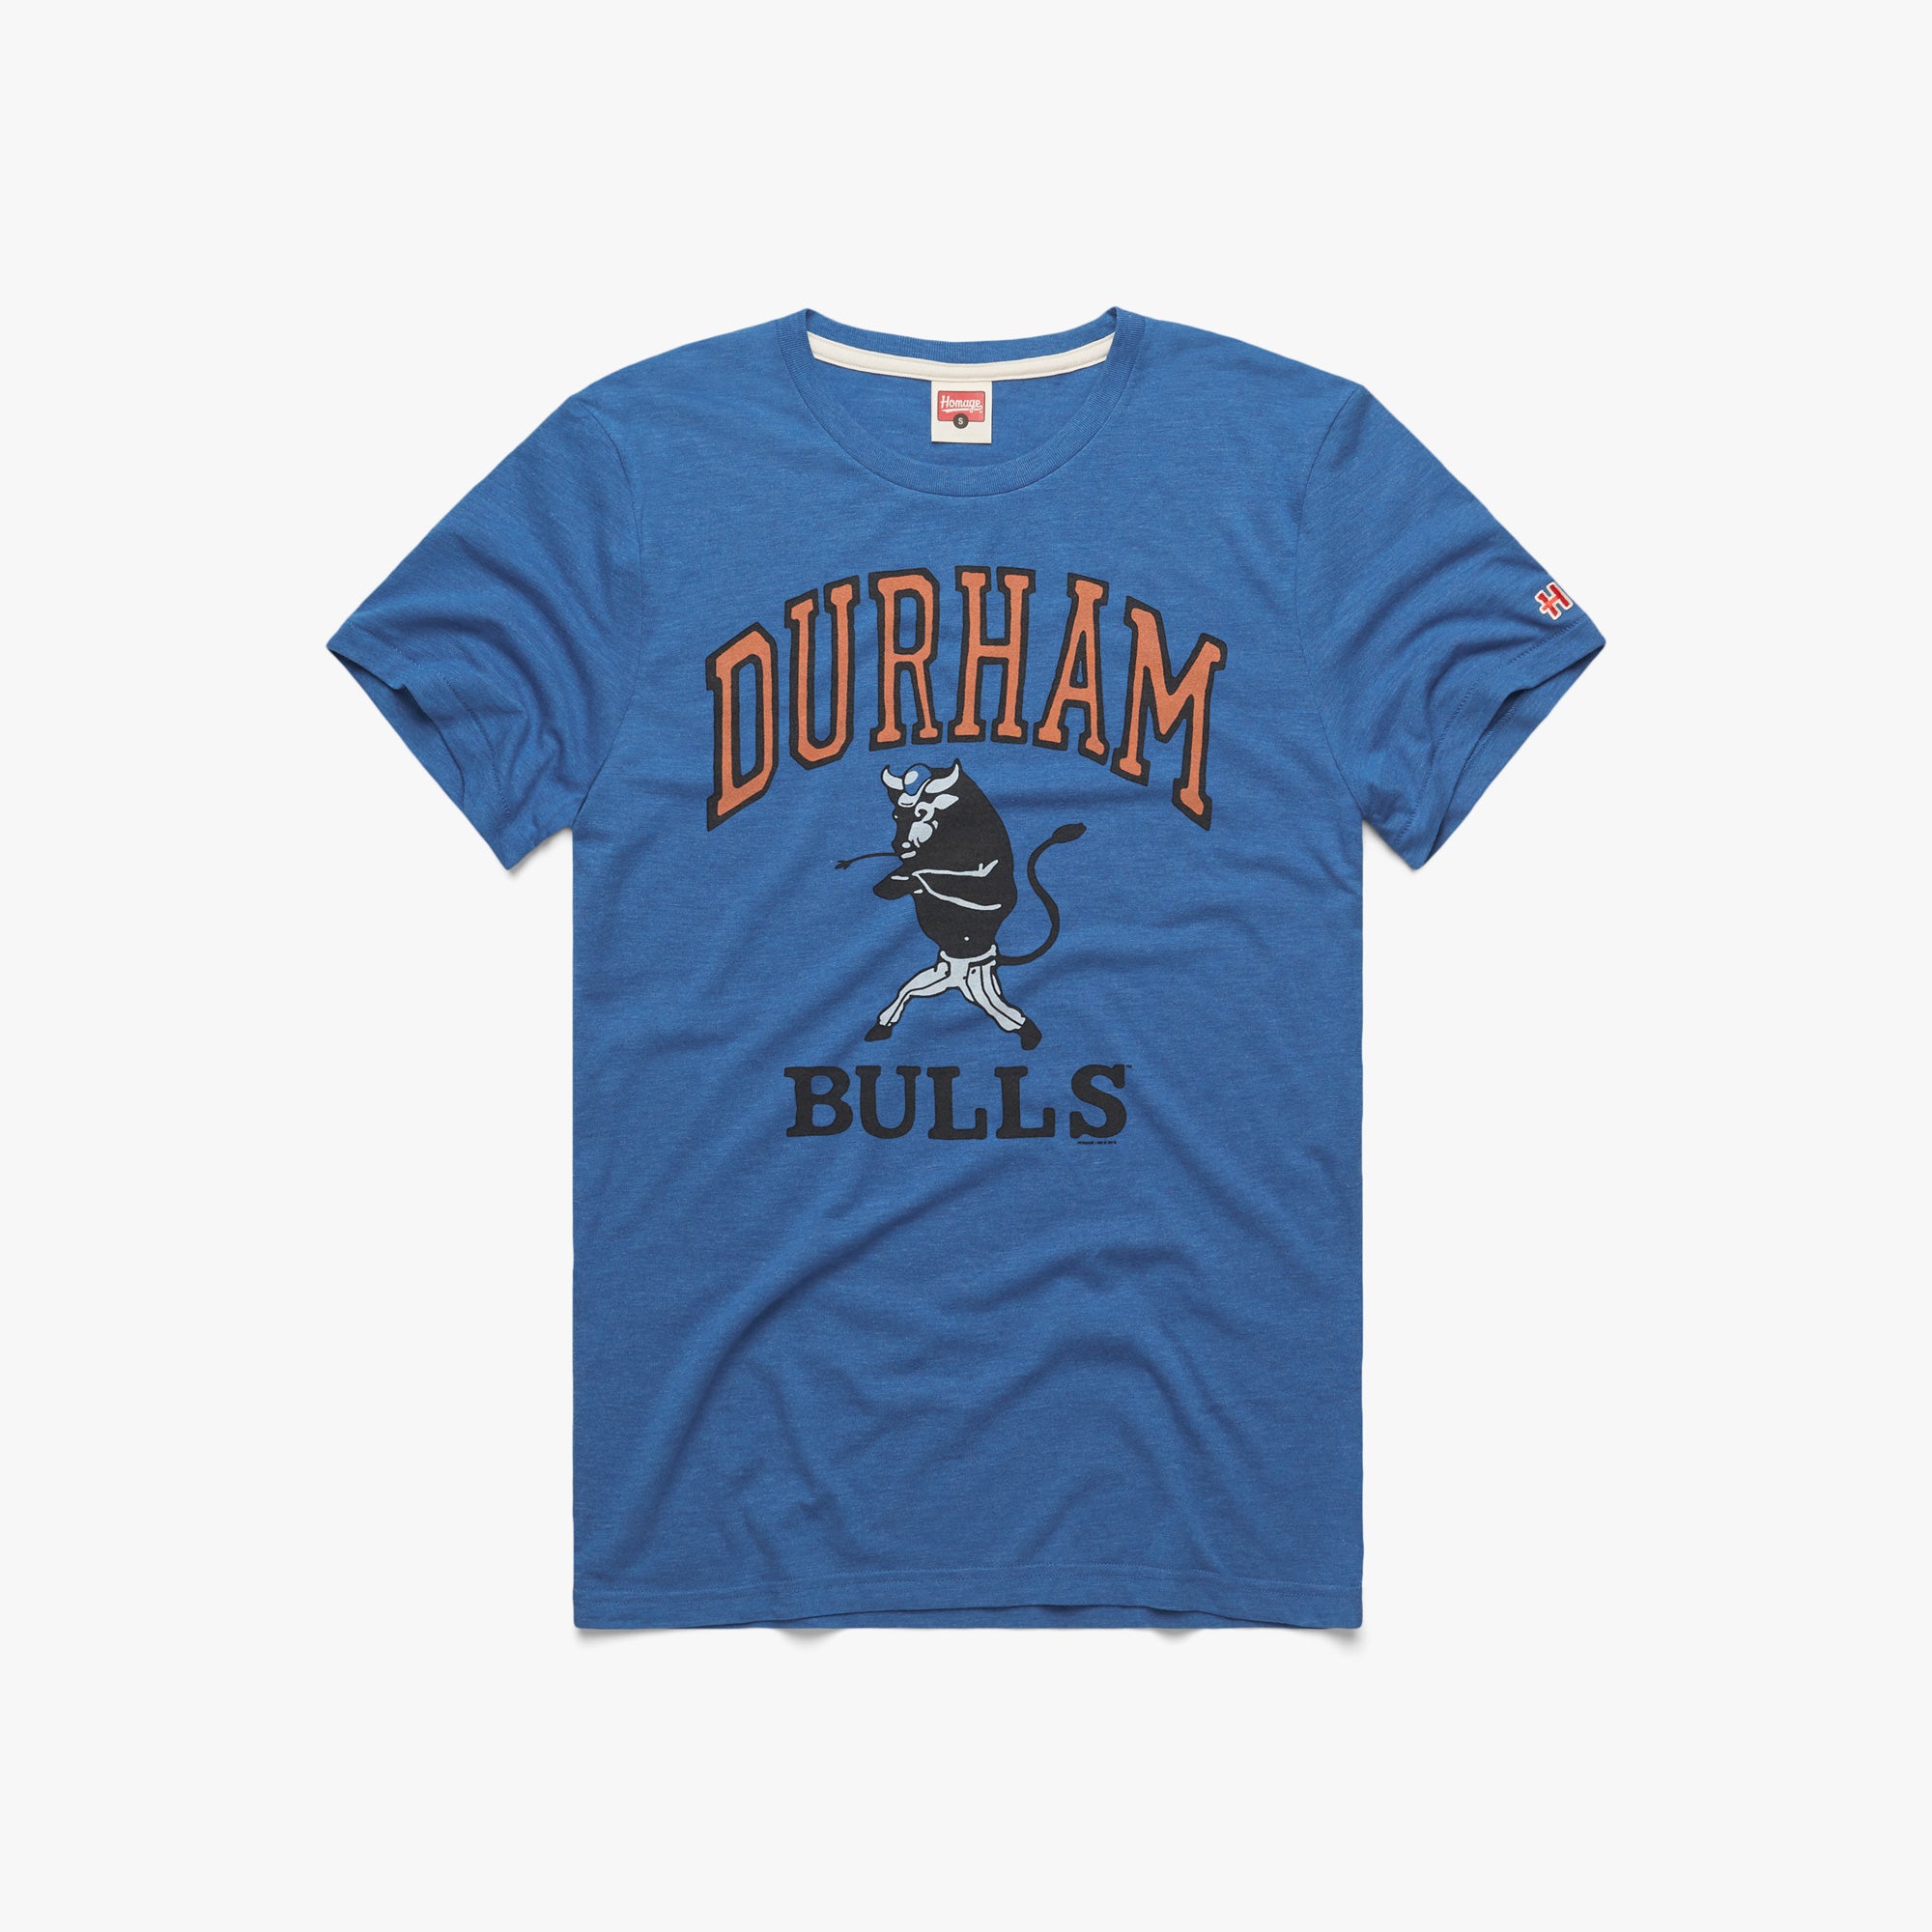 Durham Bulls T-Shirt from Homage. | Royal Blue | Vintage Apparel from Homage.